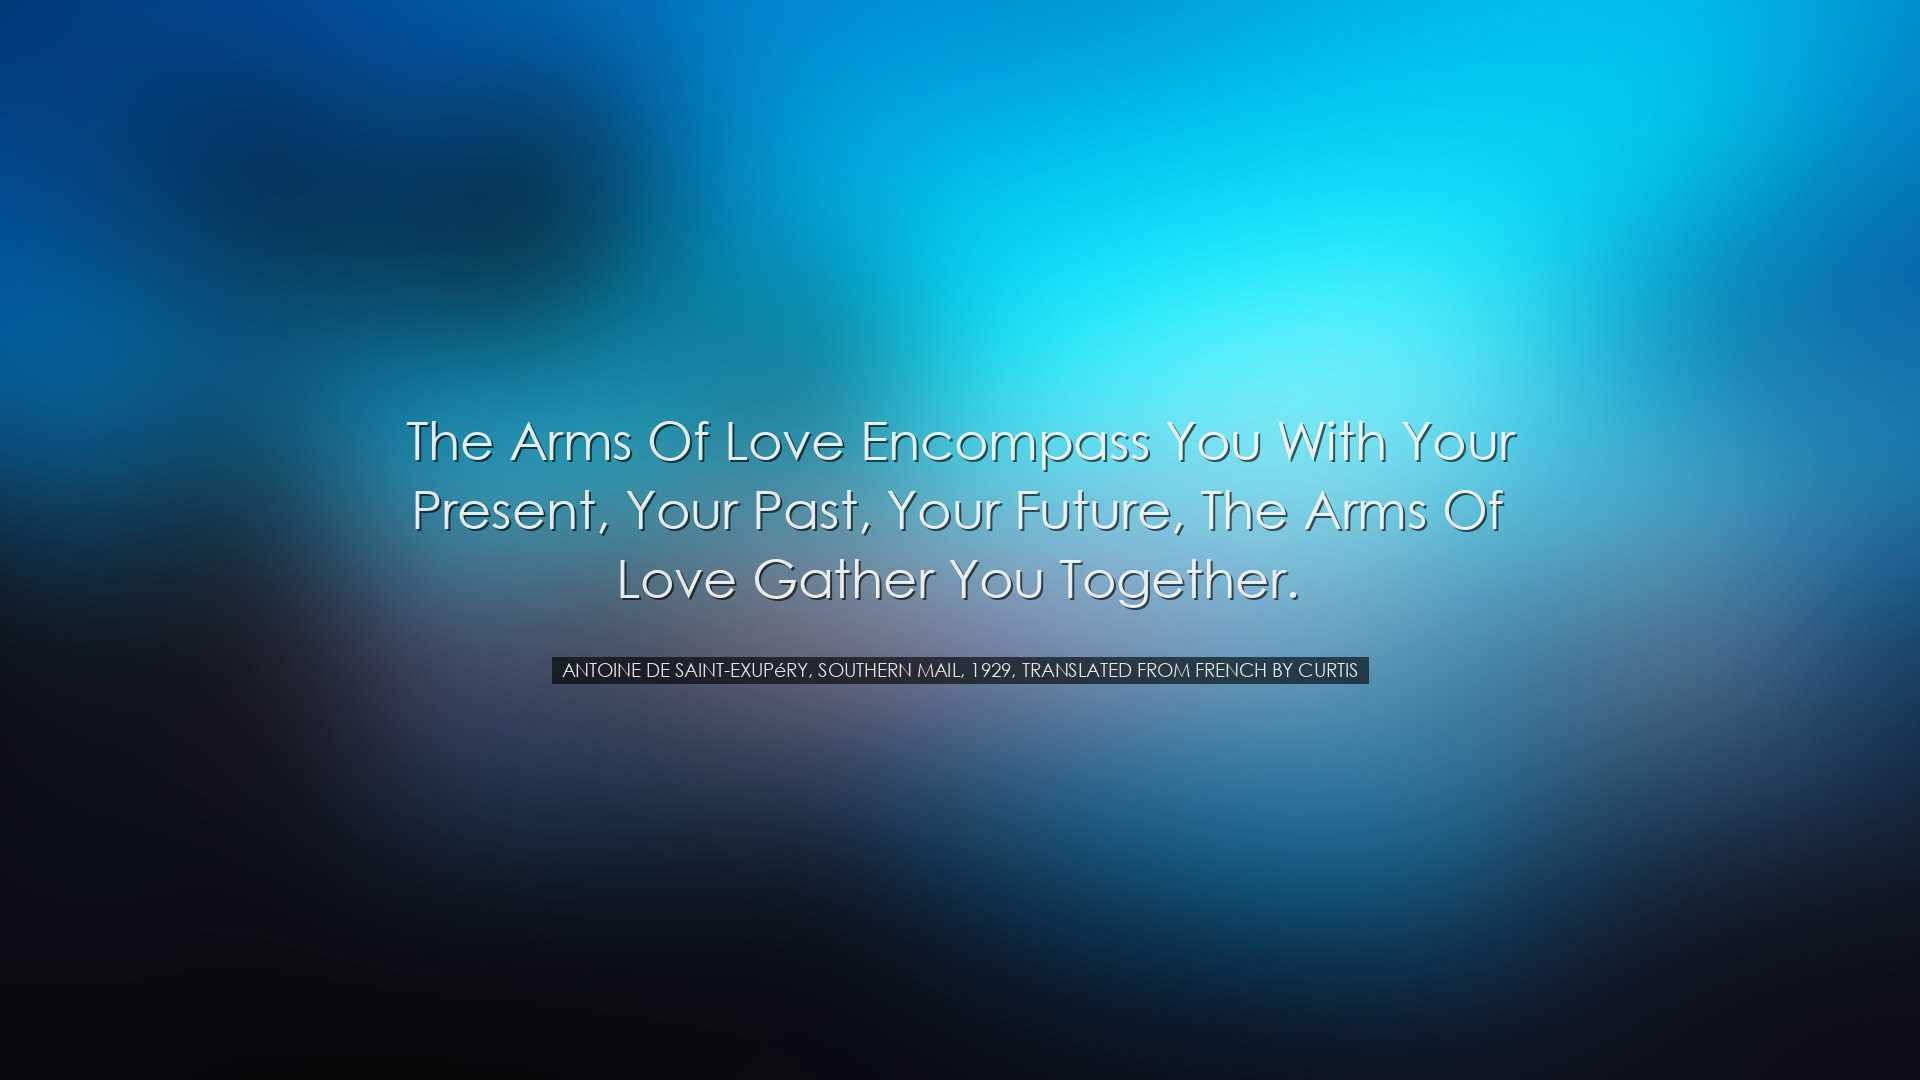 The arms of love encompass you with your present, your past, your